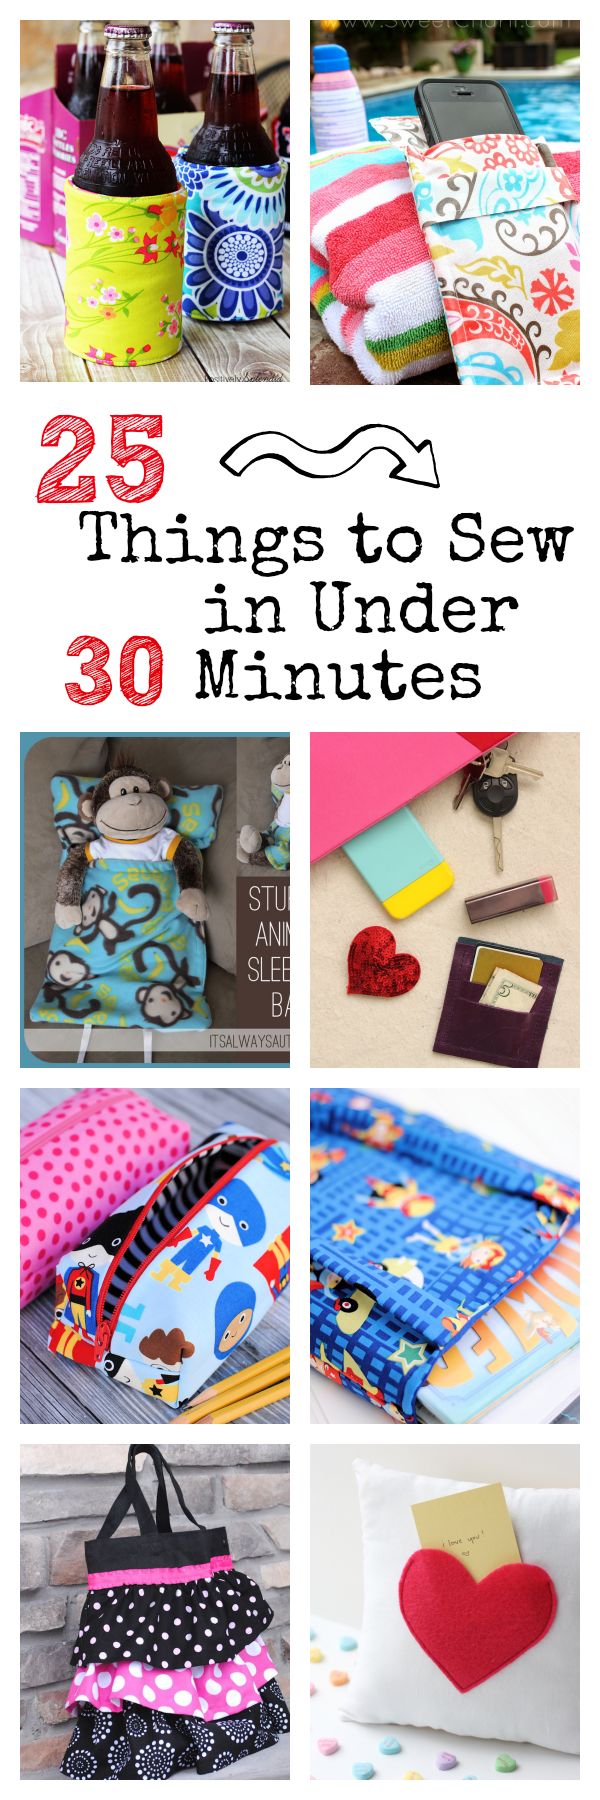 25 Things to Sew in Under 30 Minutes-Quick & Easy Projects